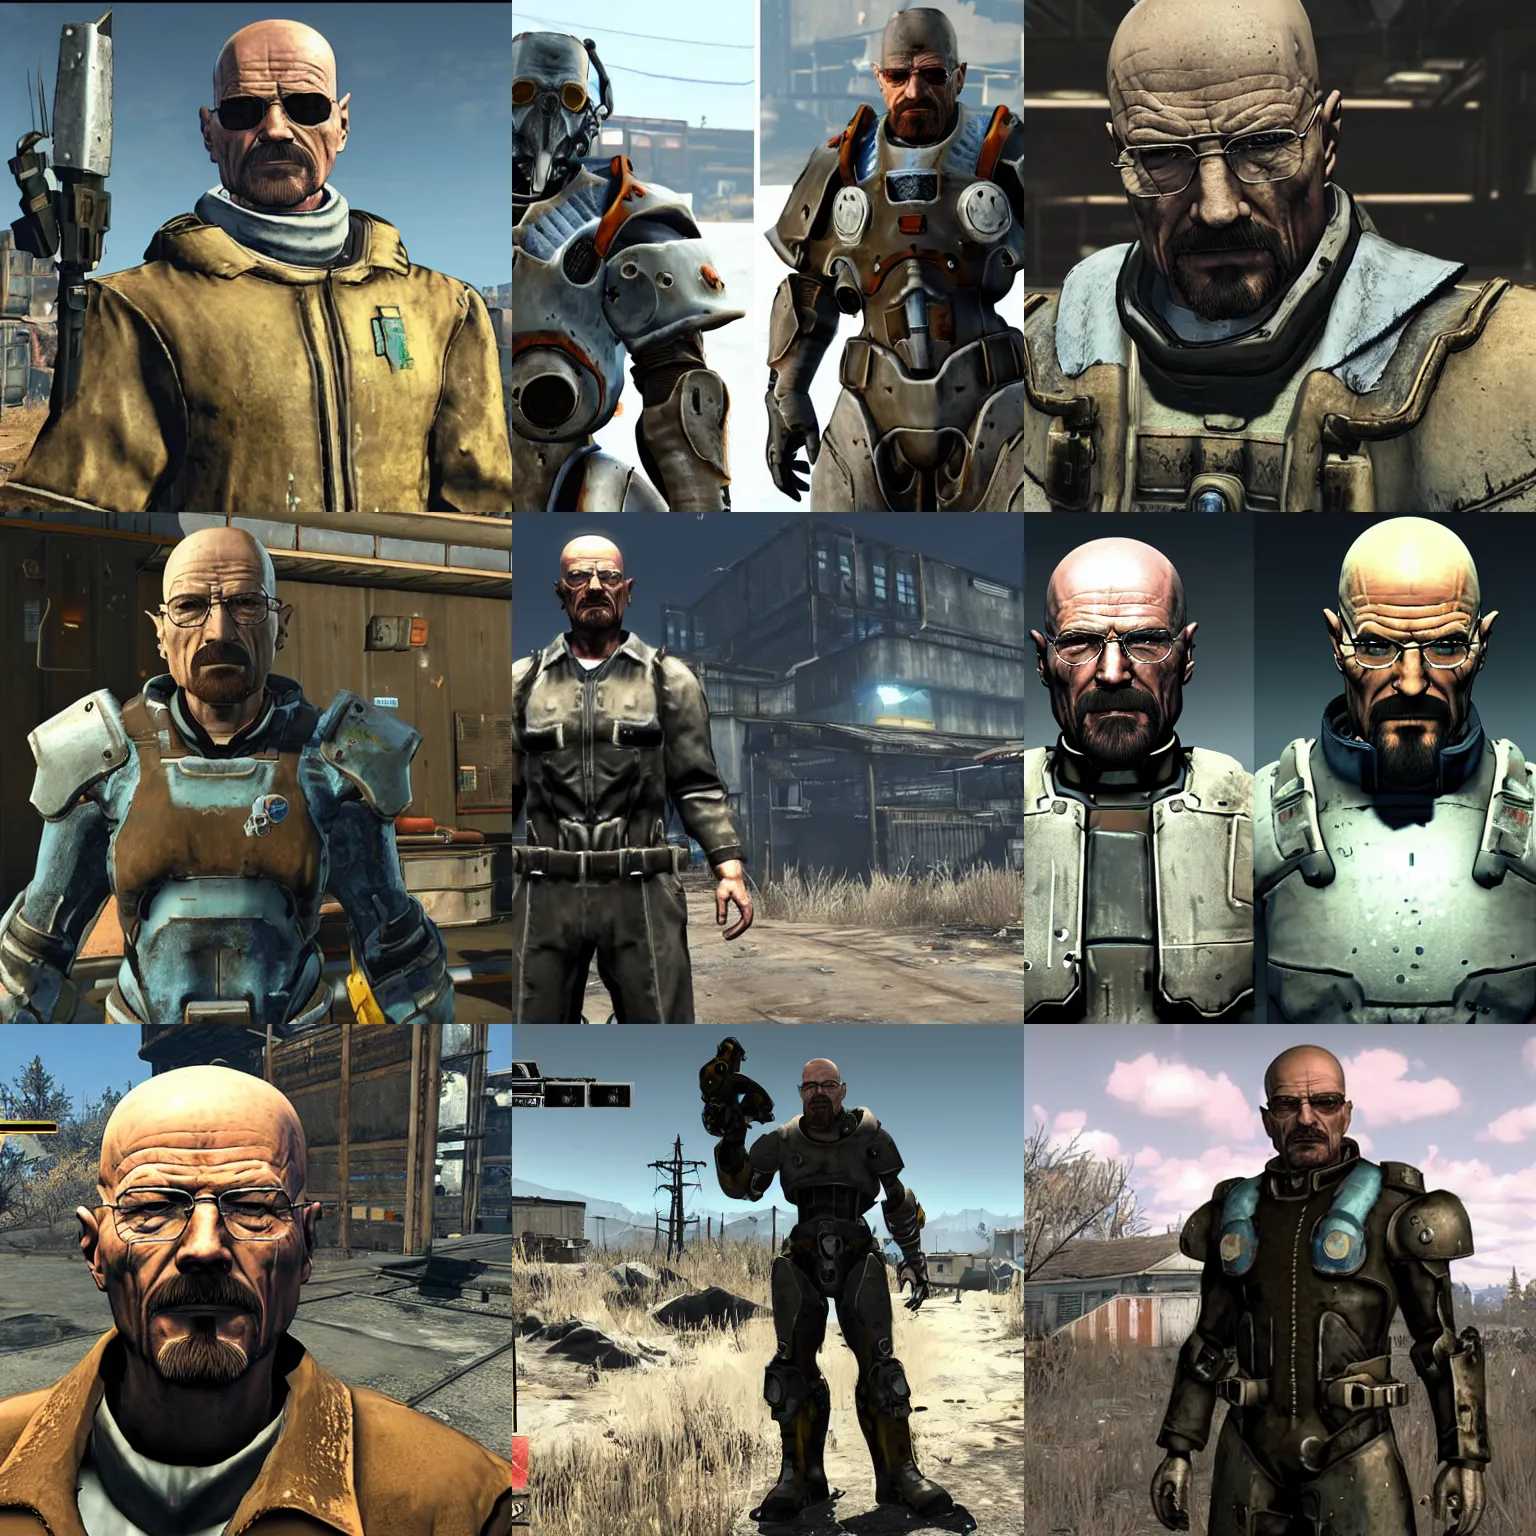 Prompt: Walter White in the fallout 4 video game as a brotherhood of steel paladin in power armor